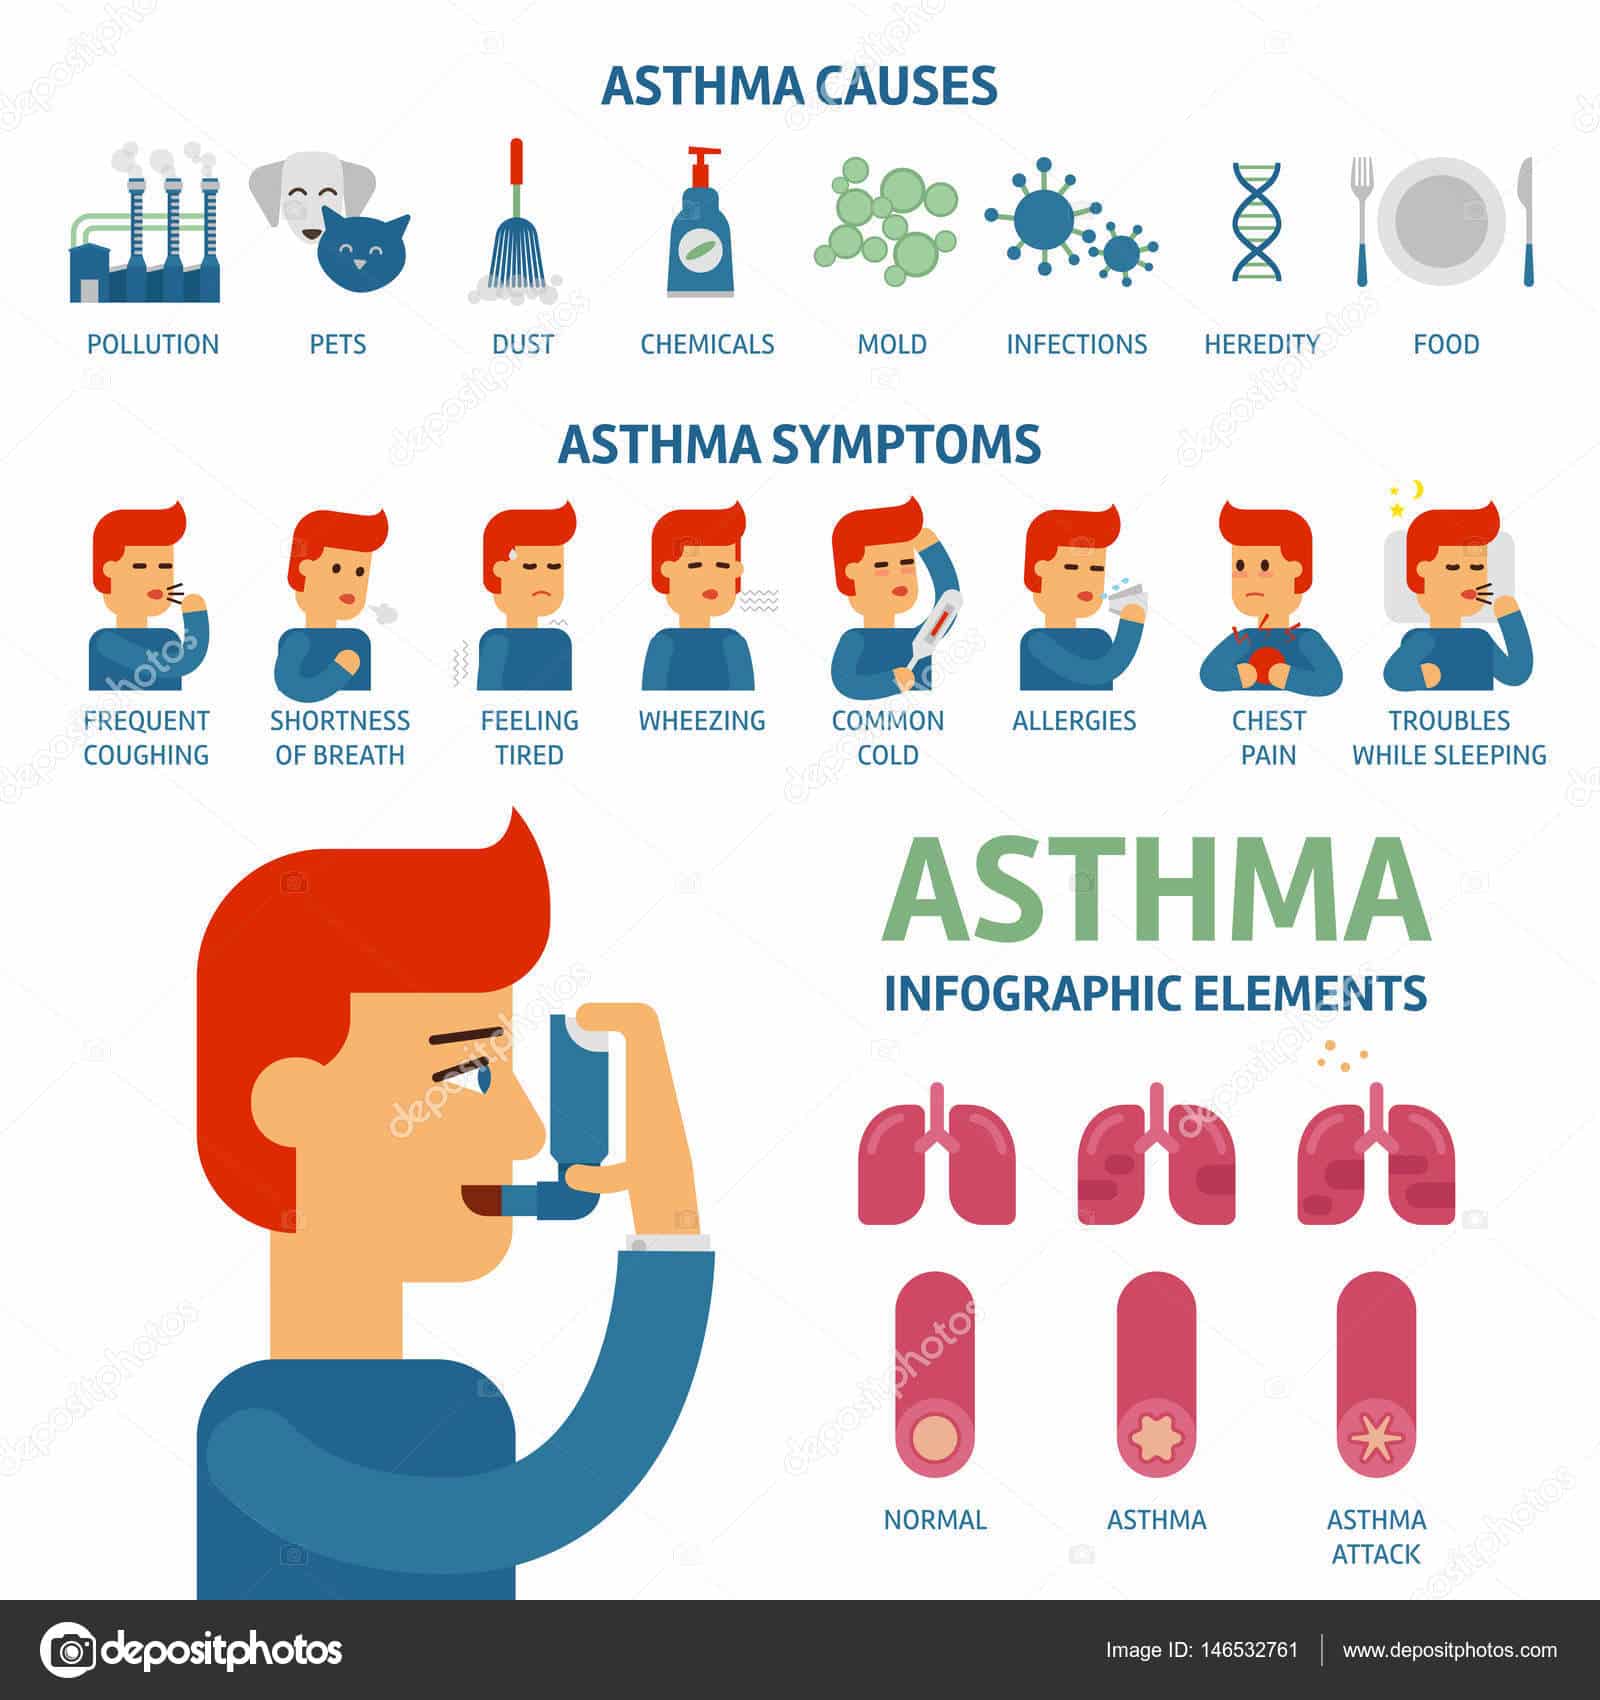 Asthma symptoms and causes infographic elements. Asthma triggers vector ...